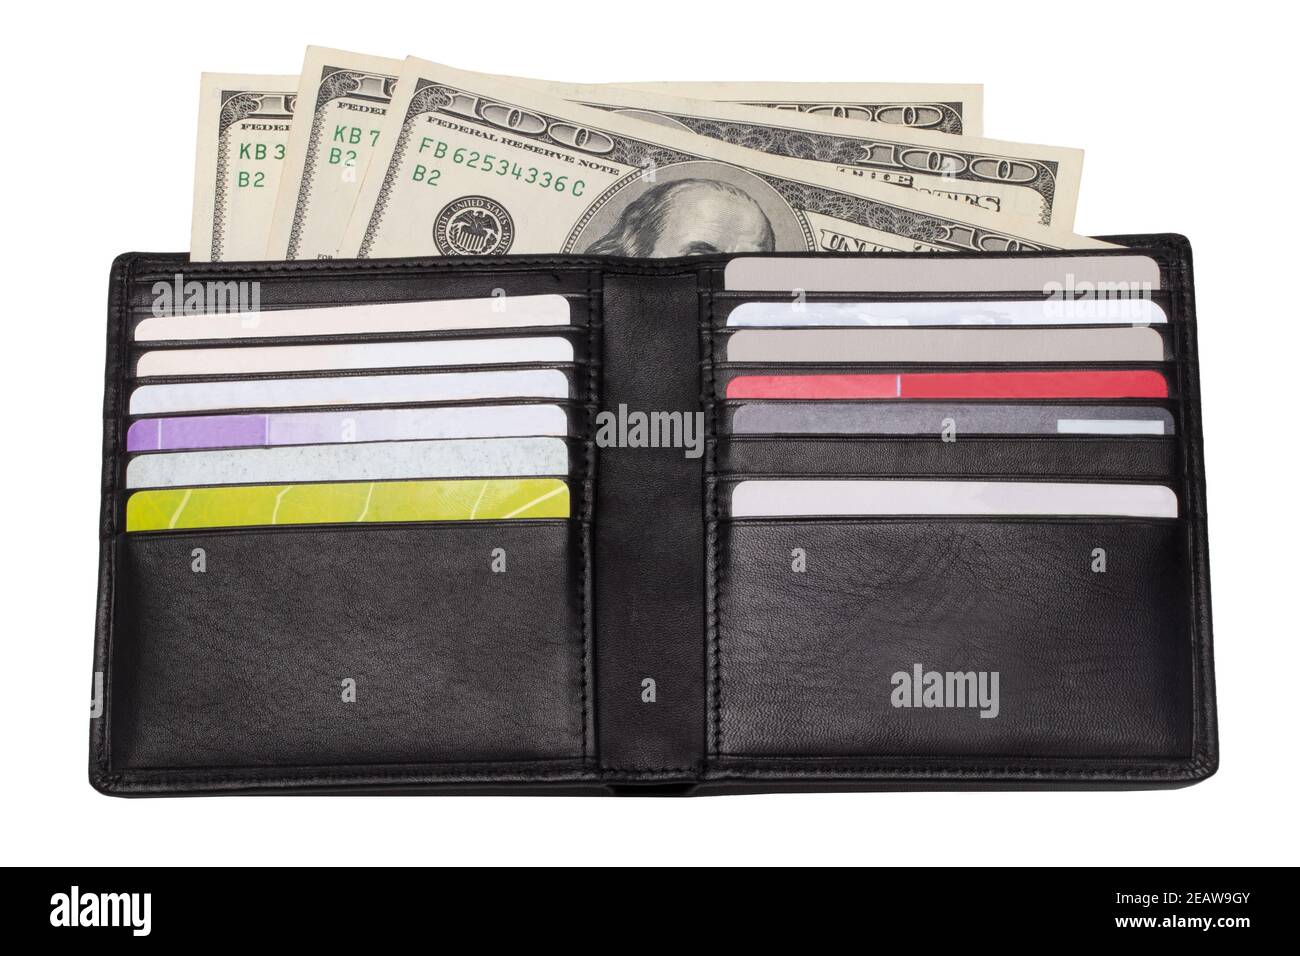 Closeup of a open new black genuine leather wallet with US dollars banknotes and various plastic cards isolated on a white background. Financial and business concept. Stock Photo